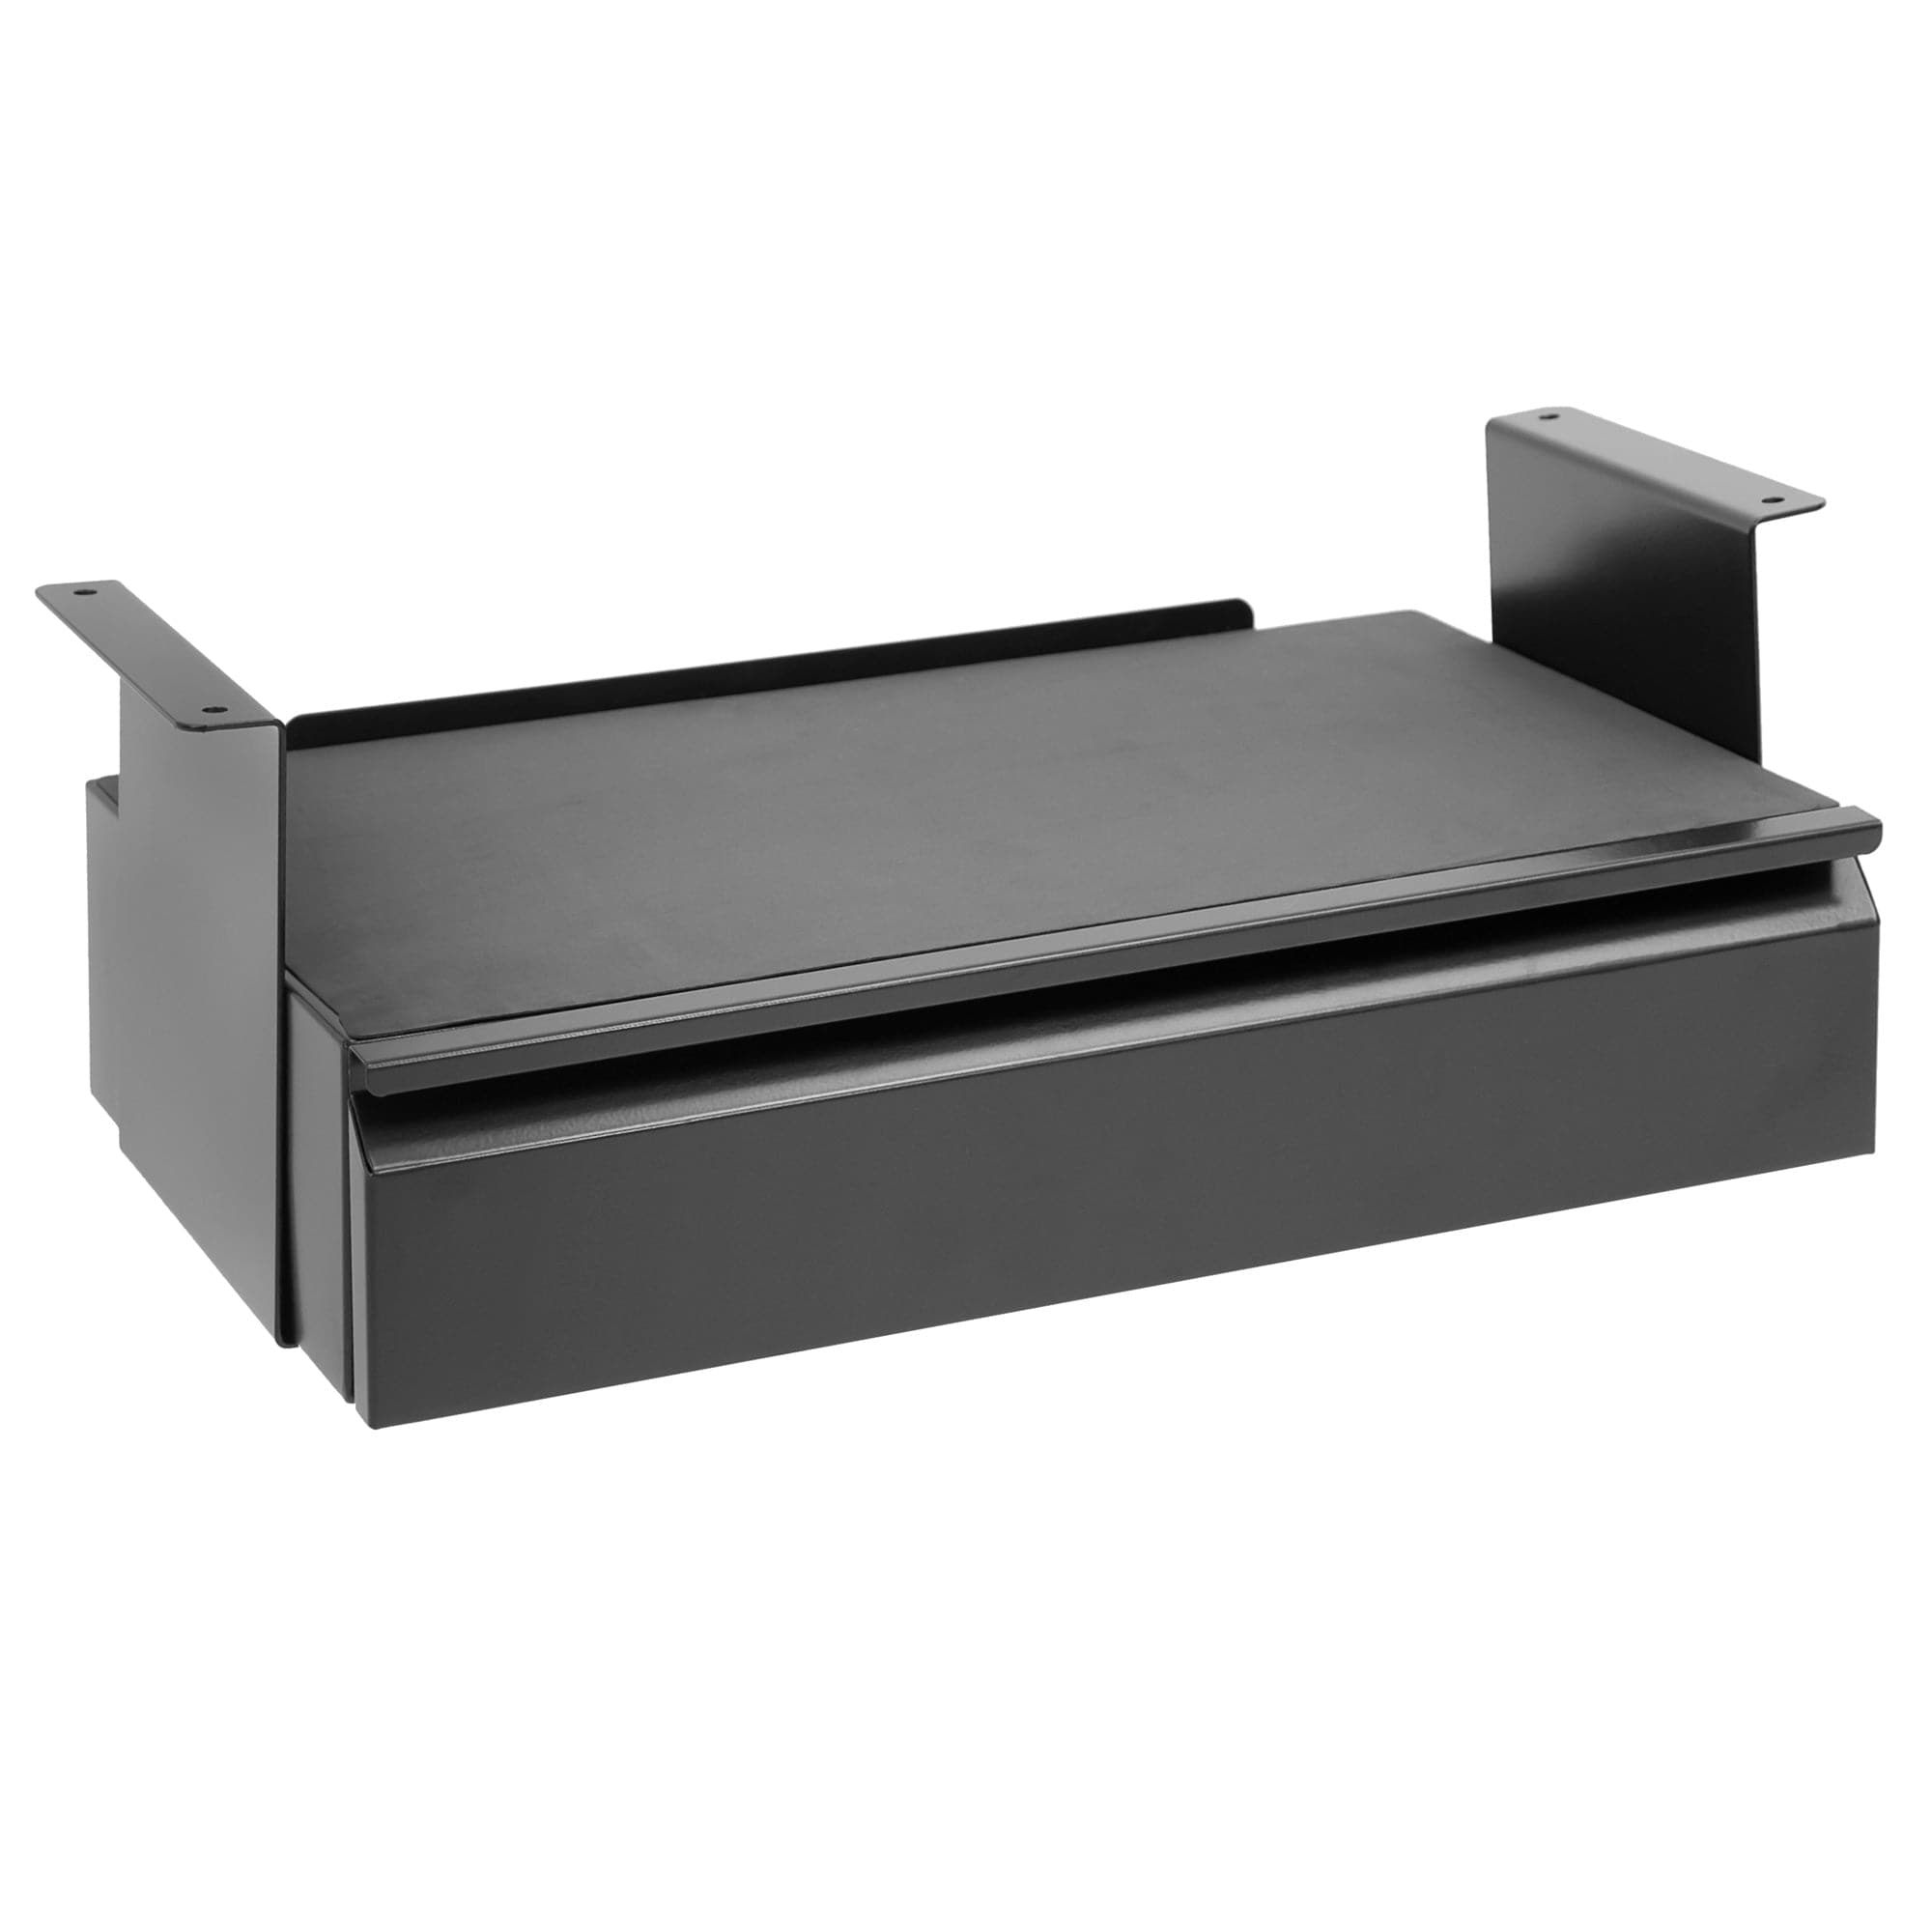 Under Desk Pull-Out Drawer Kit with Shelf